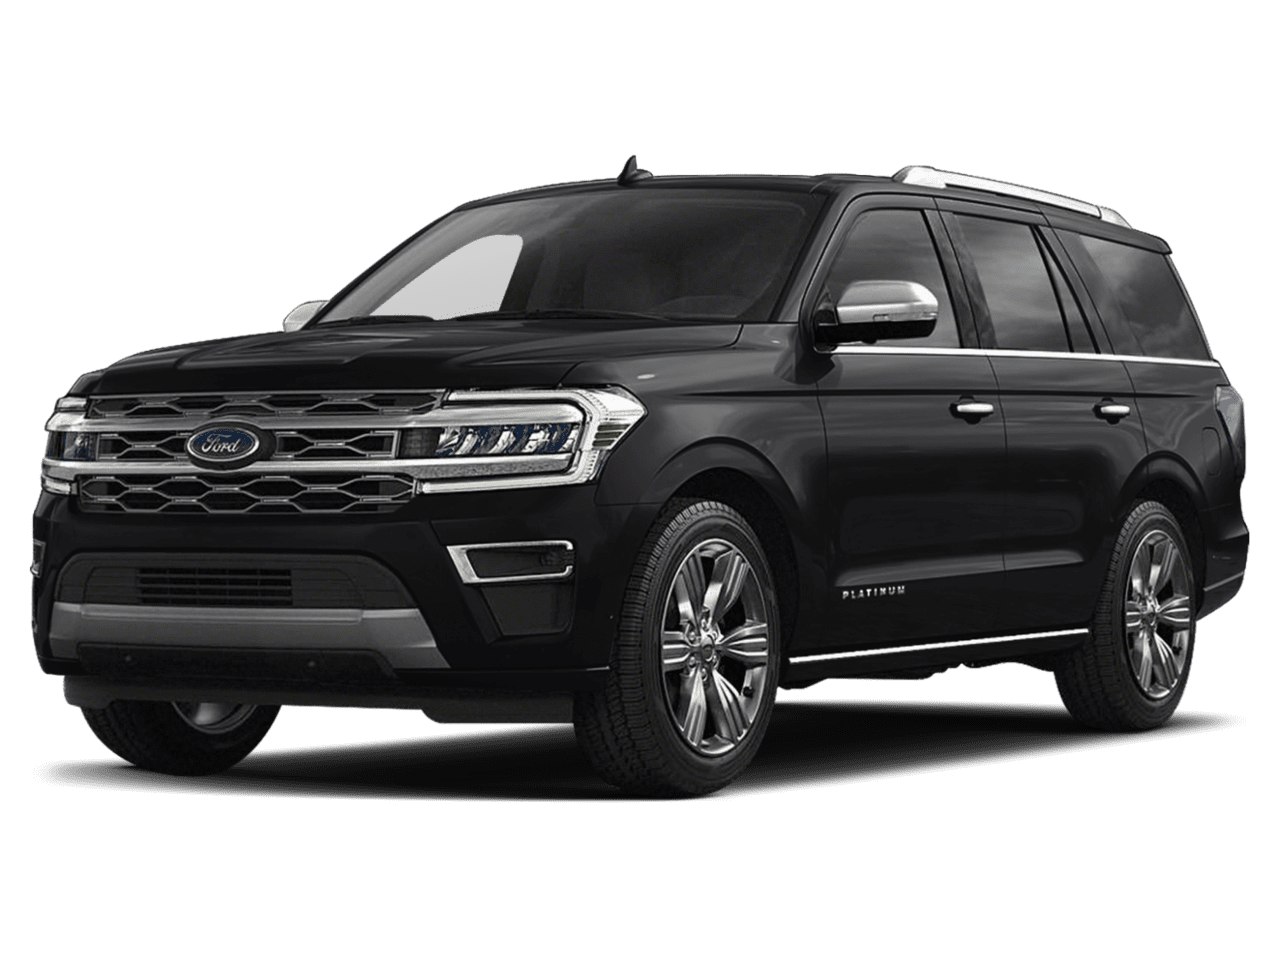 Stretch Limo Chicago, Chicago Airport Limousine Service, Stretch Limo Service Near Me, Hourly Charter, Limousine Service, Limousine Service Chicago, Stretch Limo, Stretch Limousine Chicago, Stretch Limousine